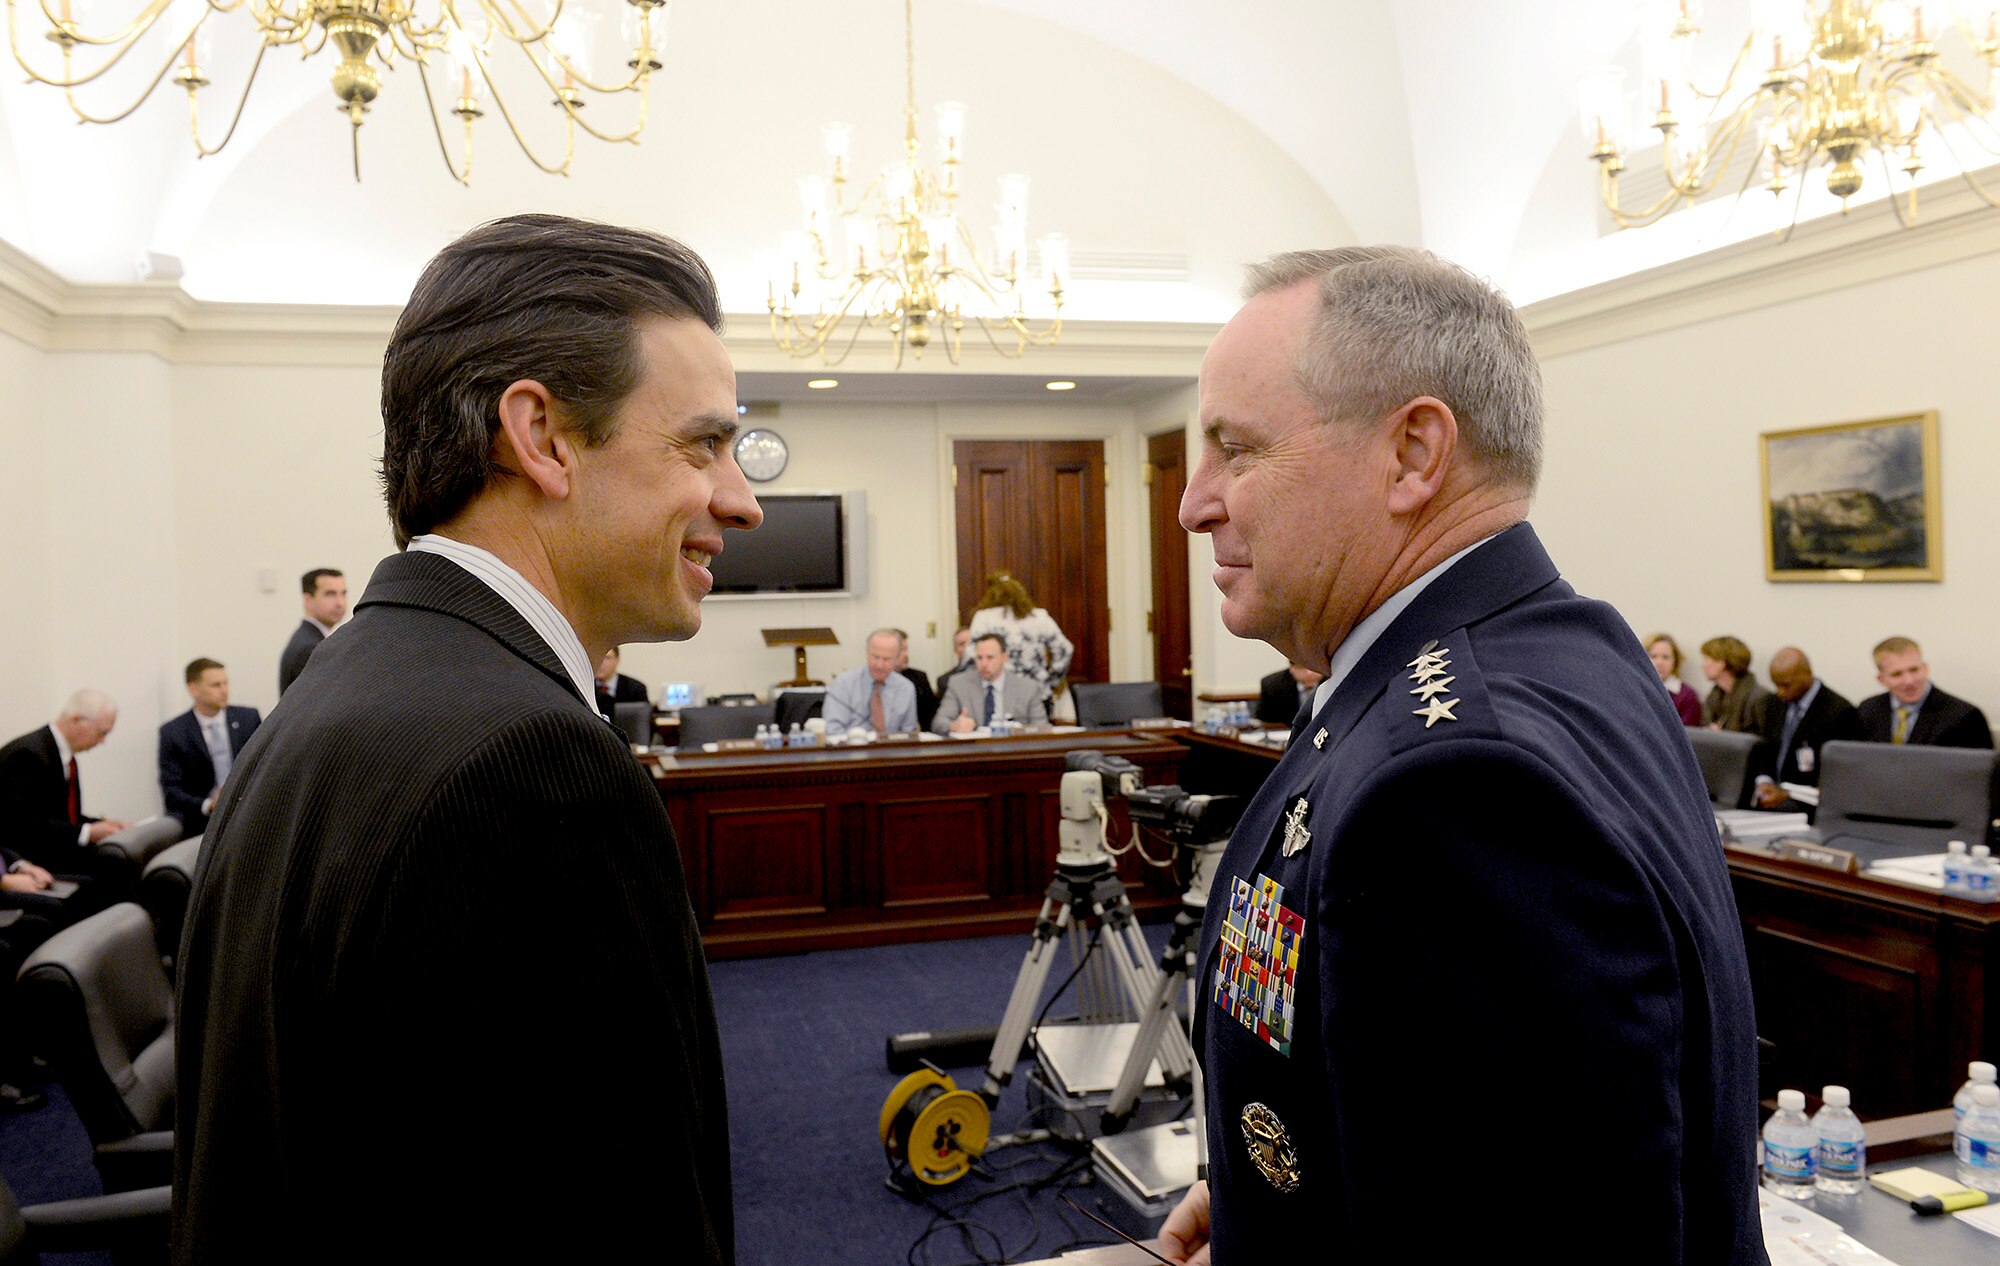 Air Force Chief of Staff Gen. Mark A. Welsh III talks to Rep. Tom Graves at the beginning of the House of Representatives Committee on Appropriations’ Defense Subcommittee, Feb. 27, 2015, in Washington. D.C. Welsh and Secretary of the Air Force Deborah Lee James both met with the House members to discuss the Air Force's Fiscal Year 2016 President's Budget Request. (U.S. Air Force photo/Scott M. Ash)